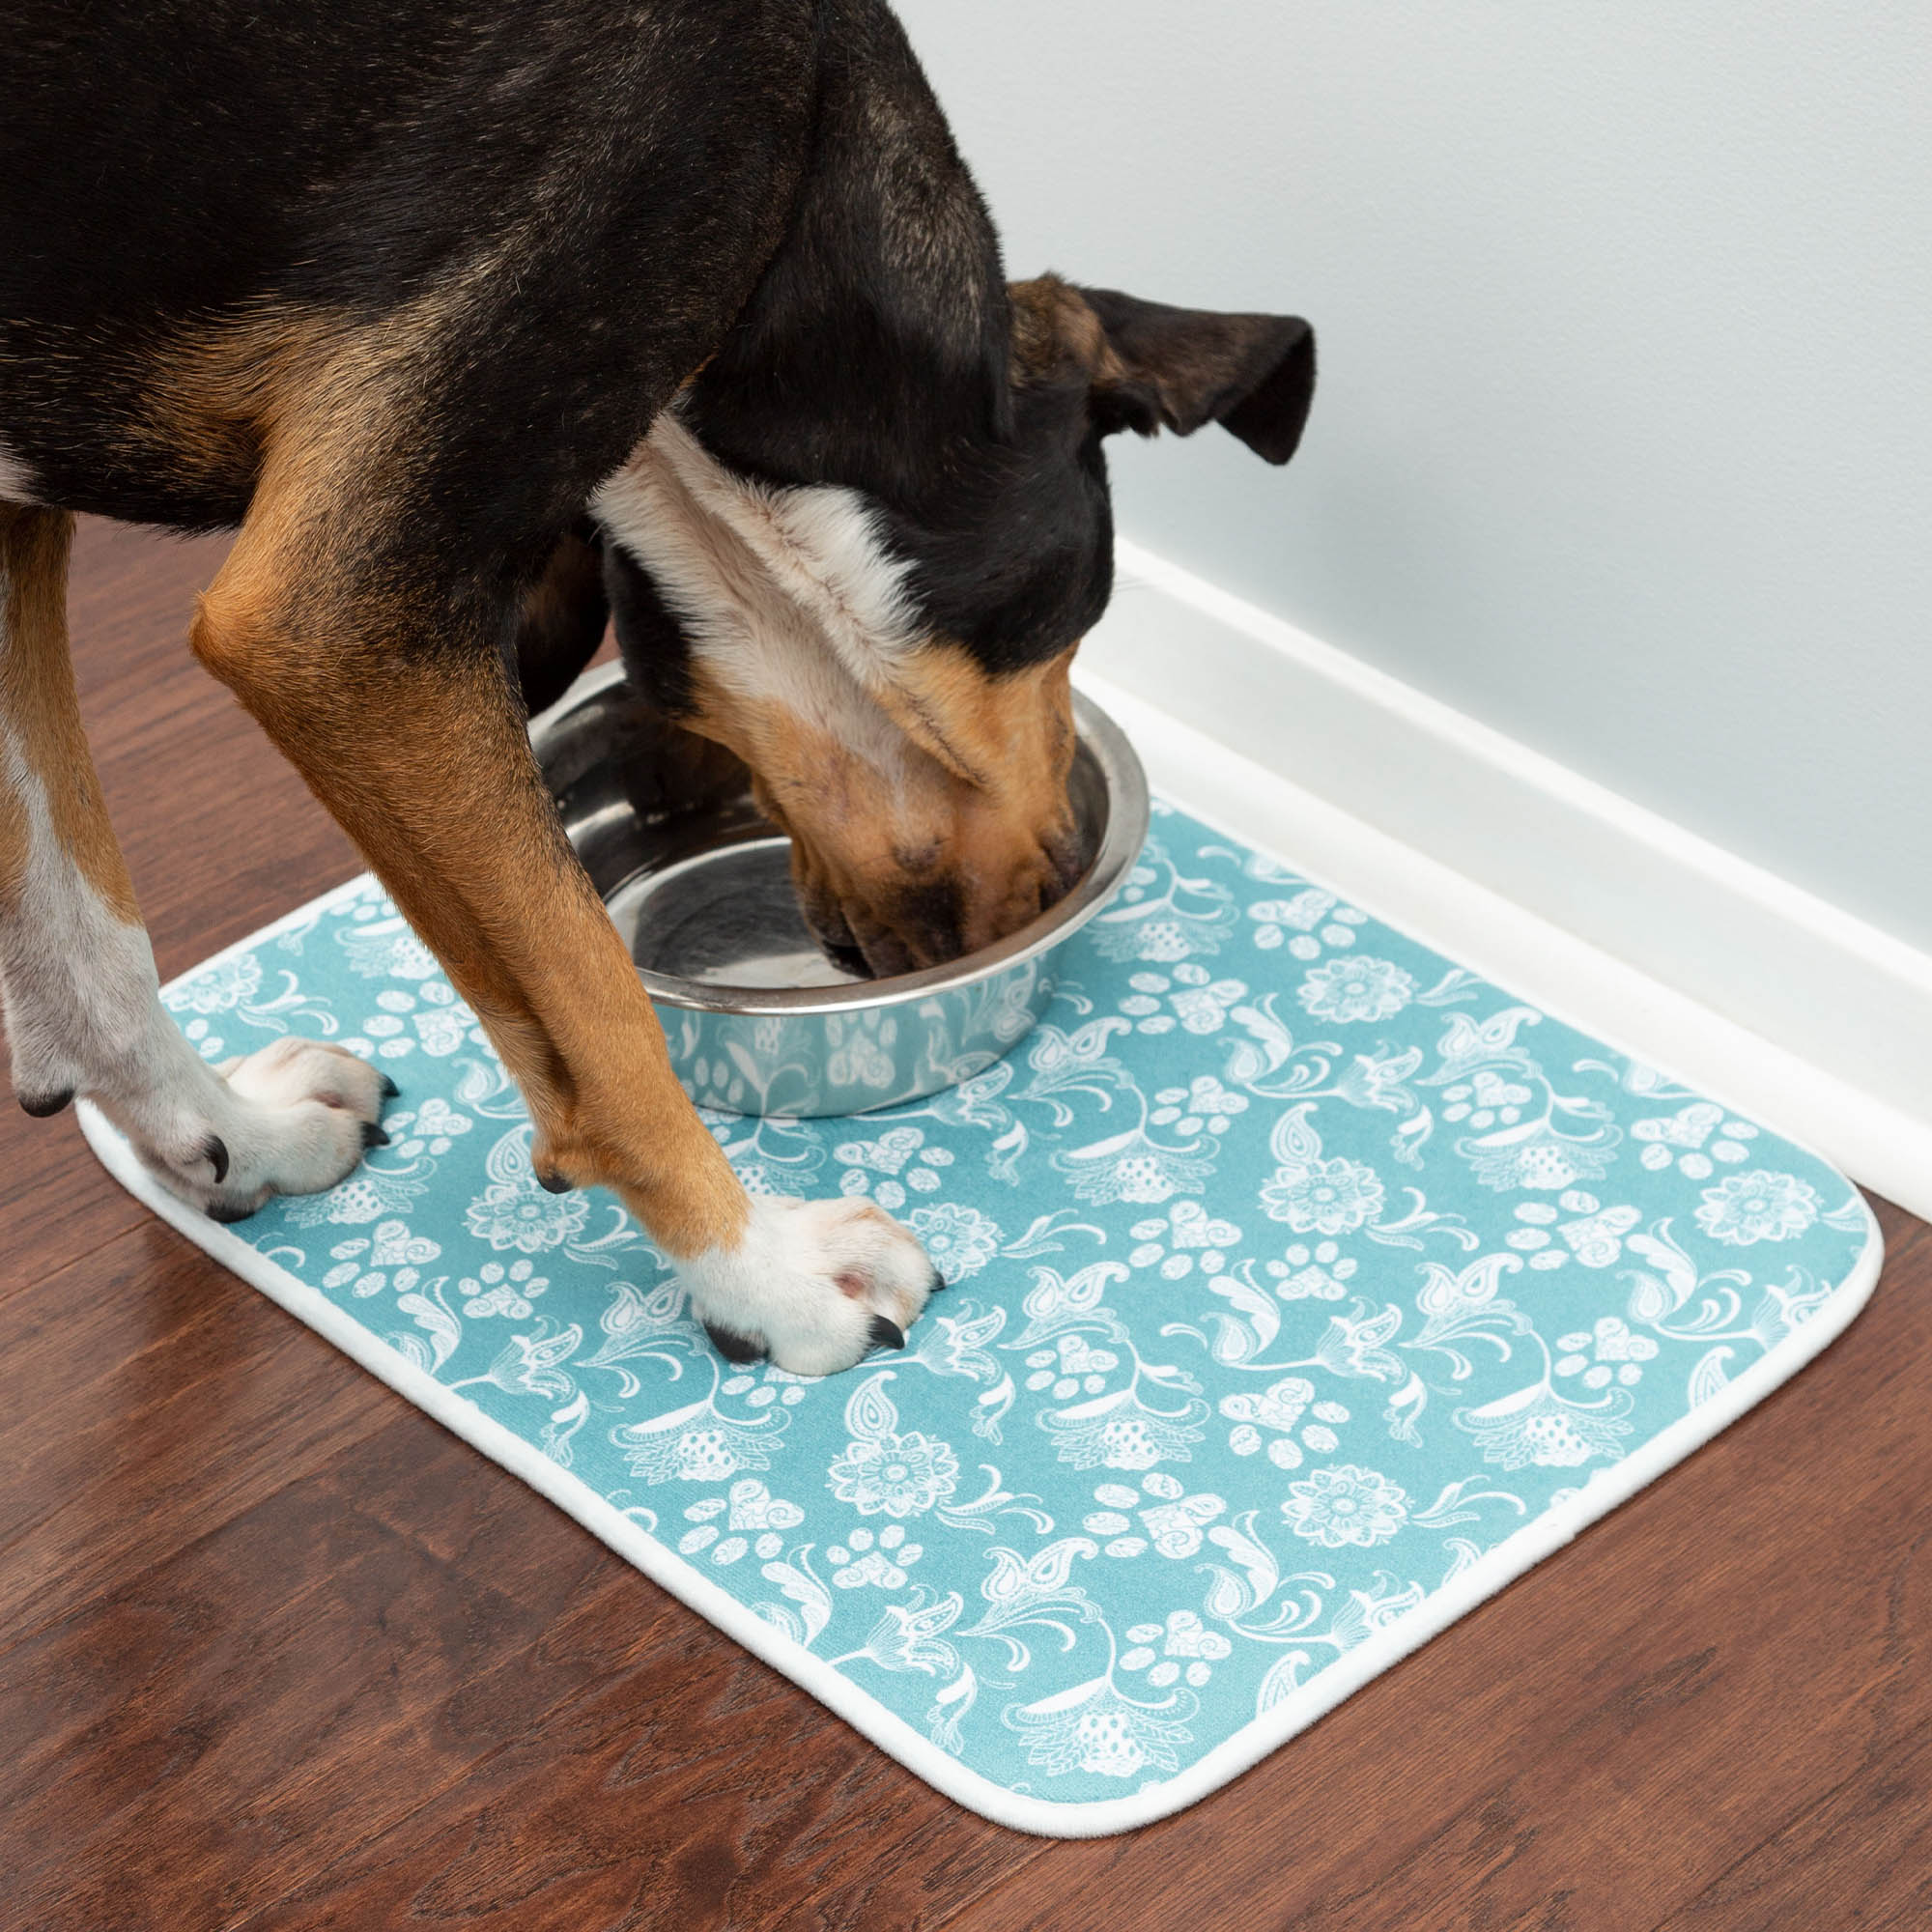 Messy Paws Absorbent Pet Dish Mat - Turquoise Paisley Paws